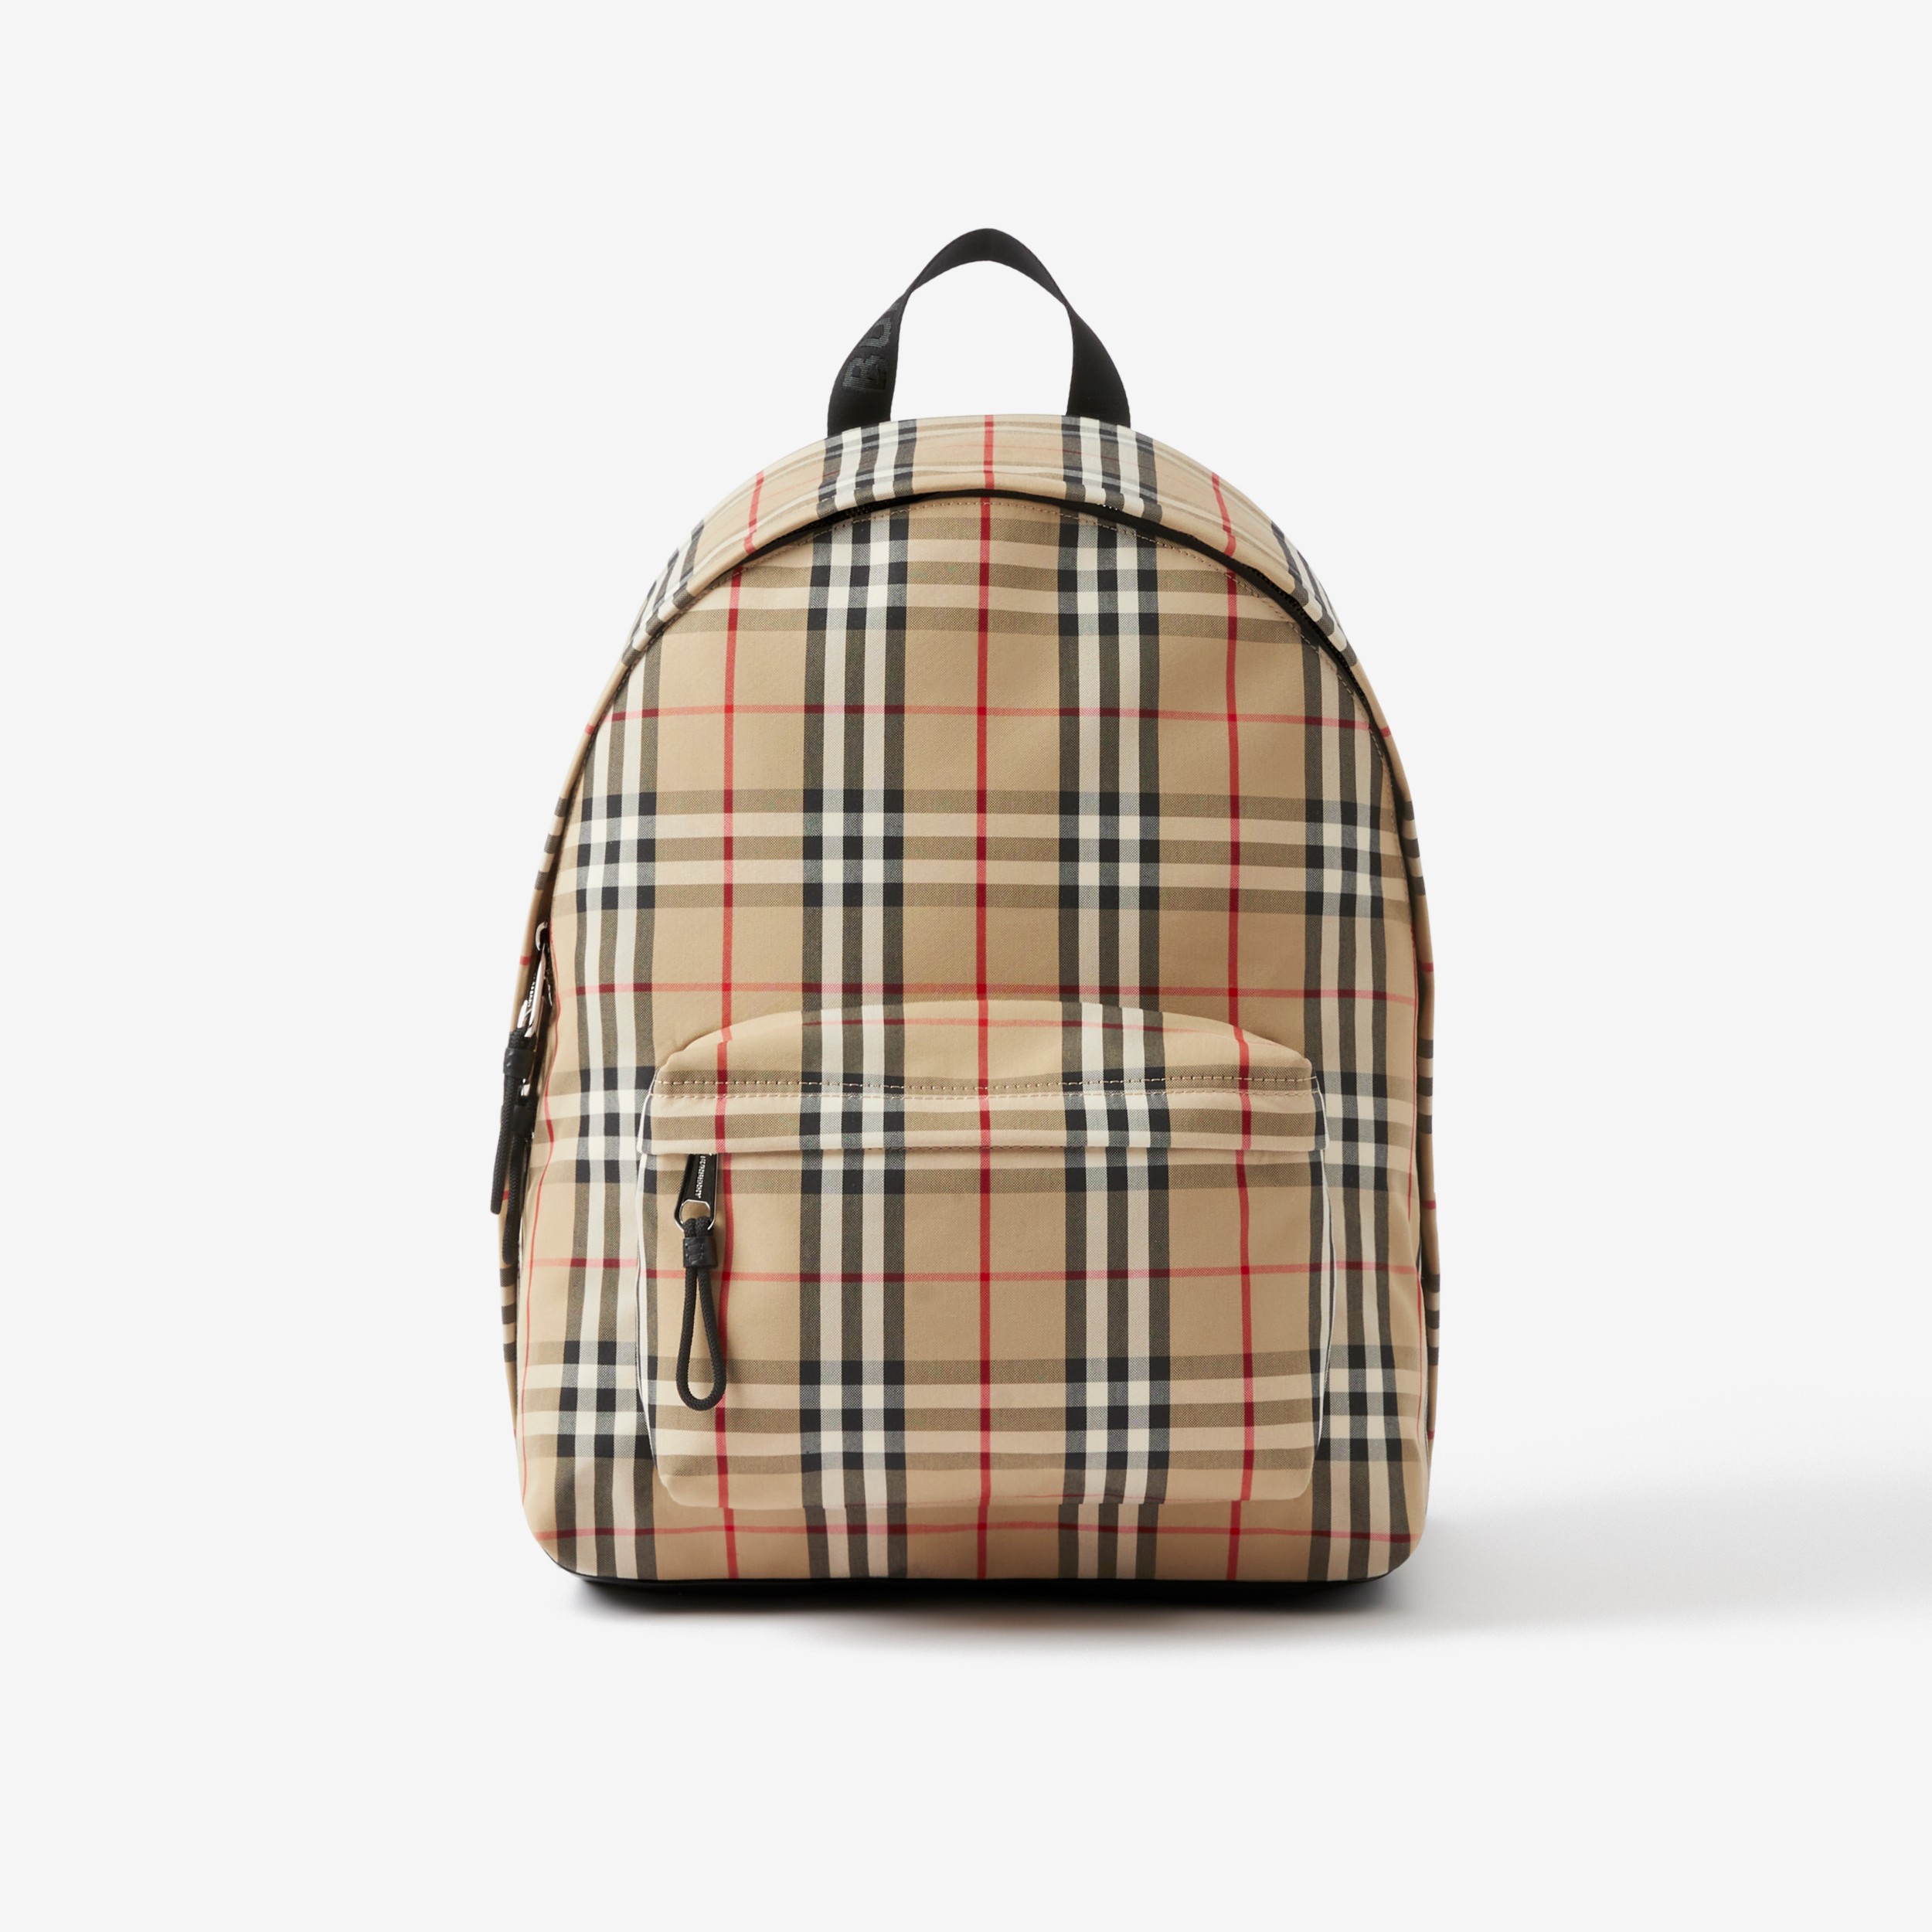 Total 79+ imagen burberry style backpack